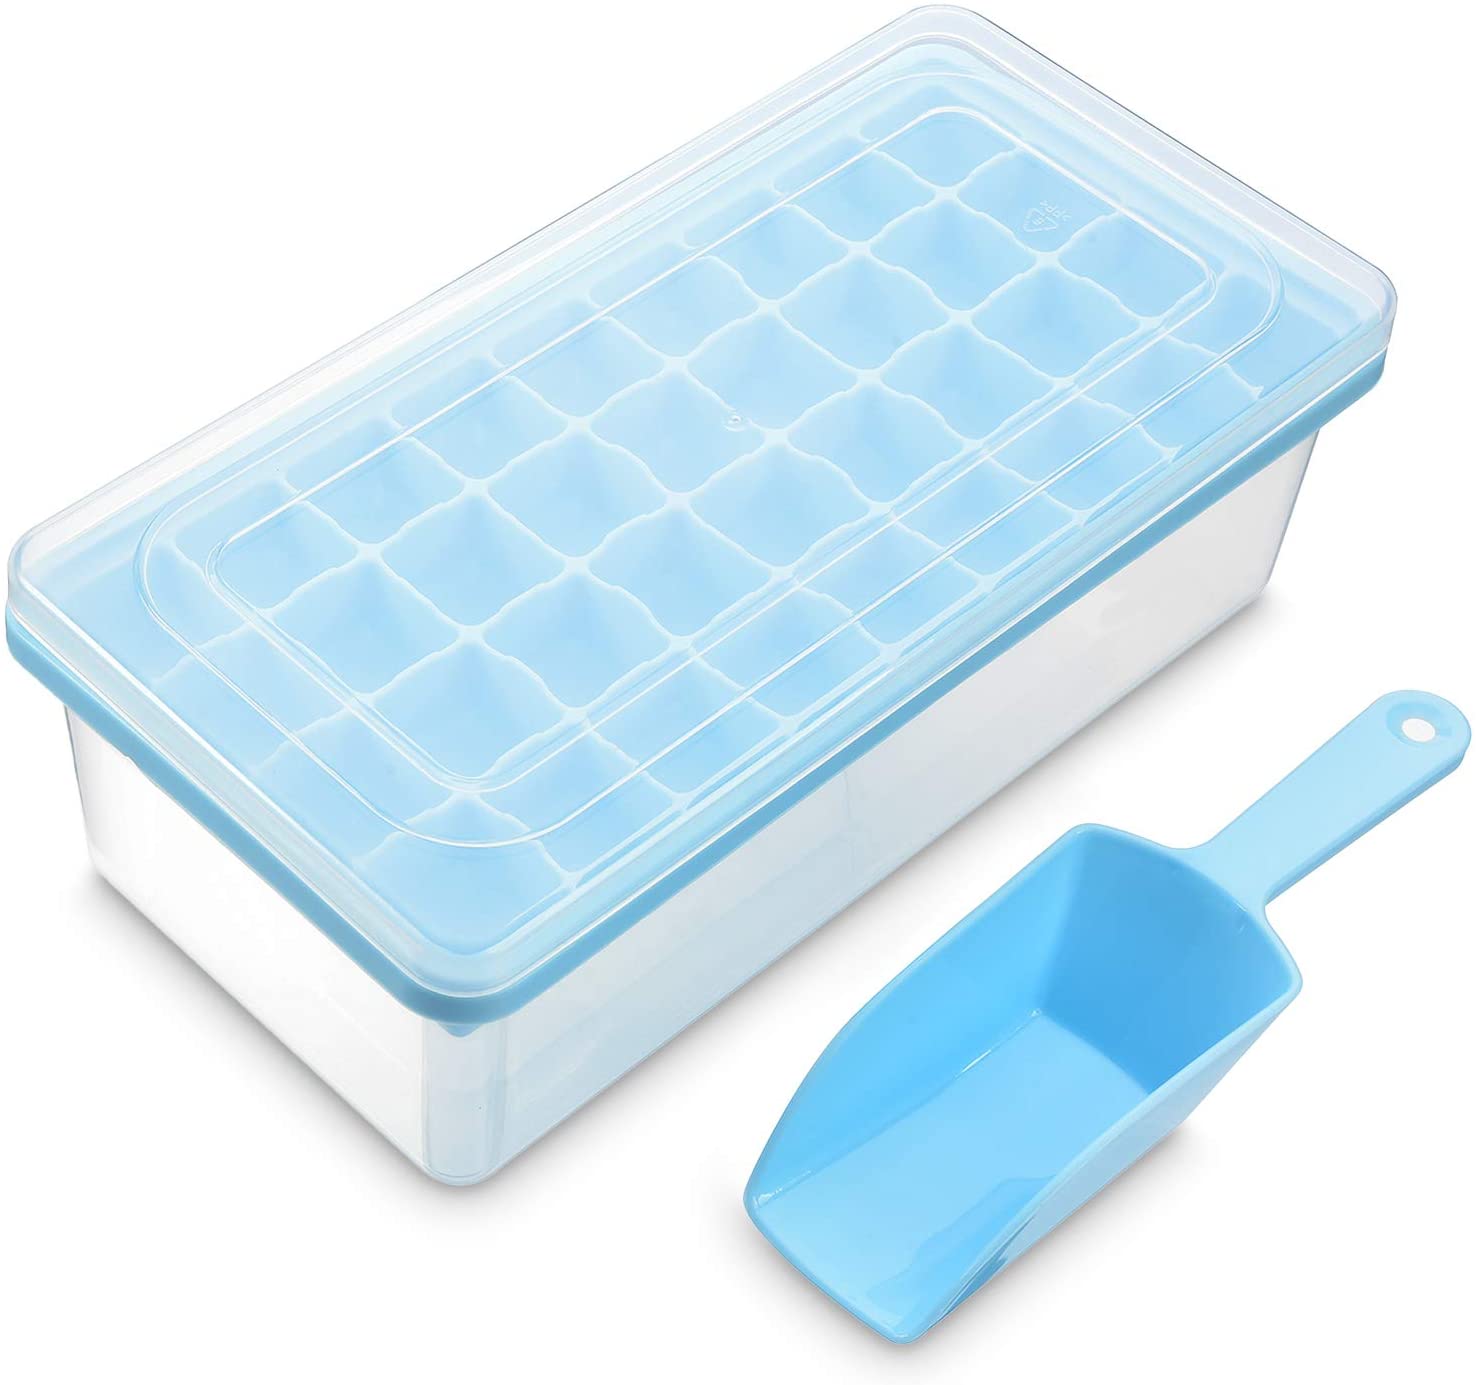 Ice Cube Tray With Lid and Bin - Silicone Ice Tray For Freezer | Comes with Ice Container, Scoop and Cover | Good Size Ice Bucket